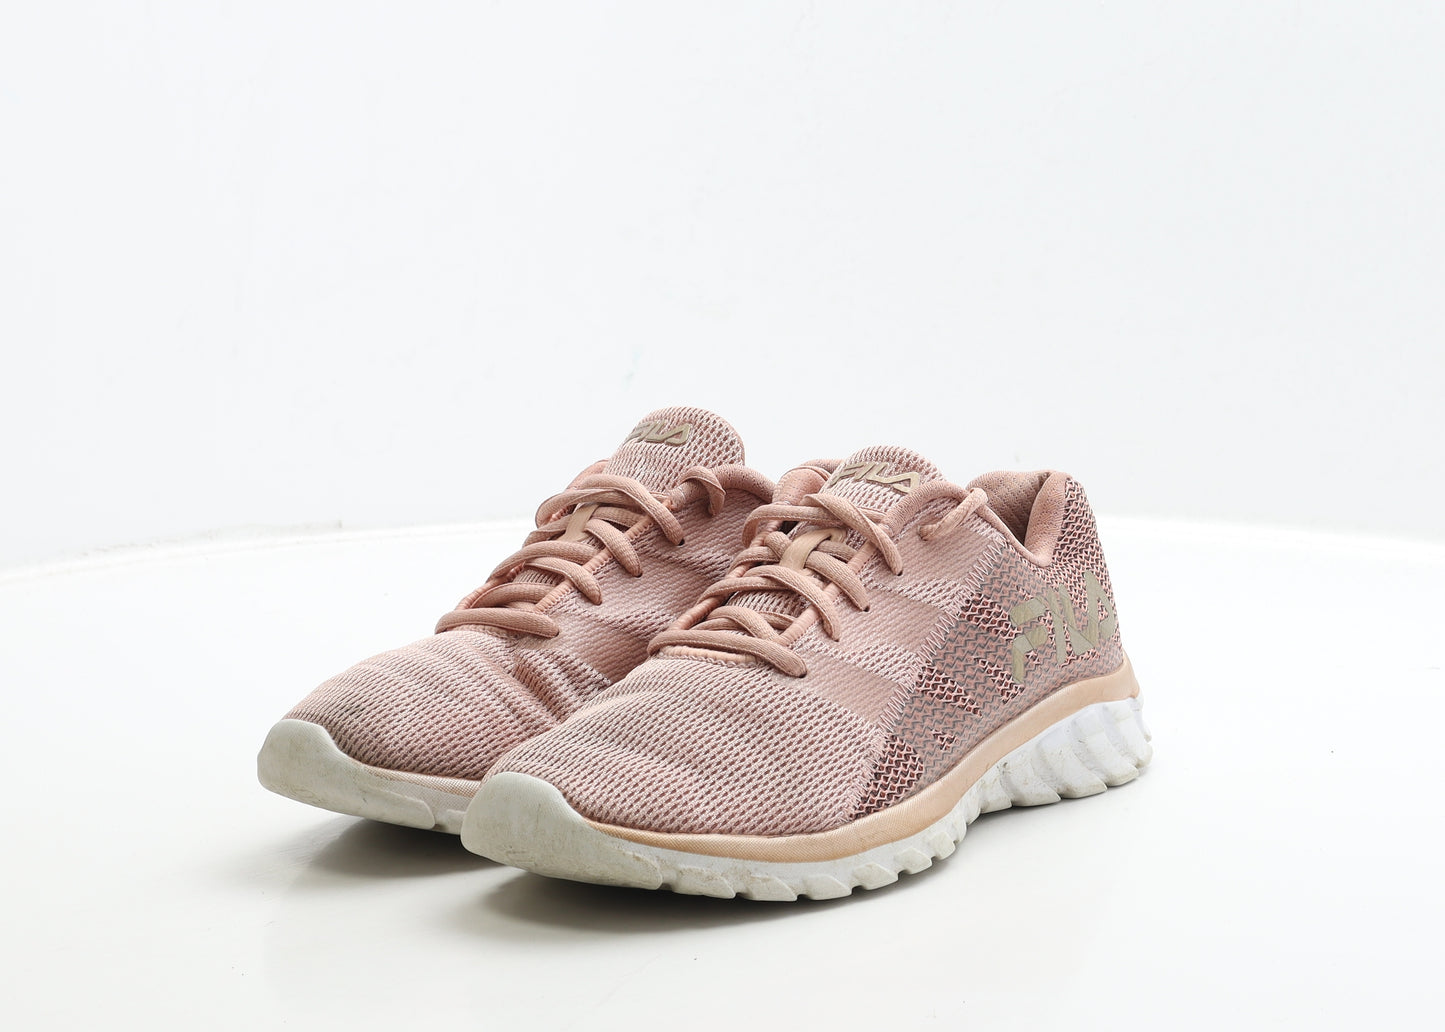 FILA Womens Pink Polyester Trainer UK 4 37.5